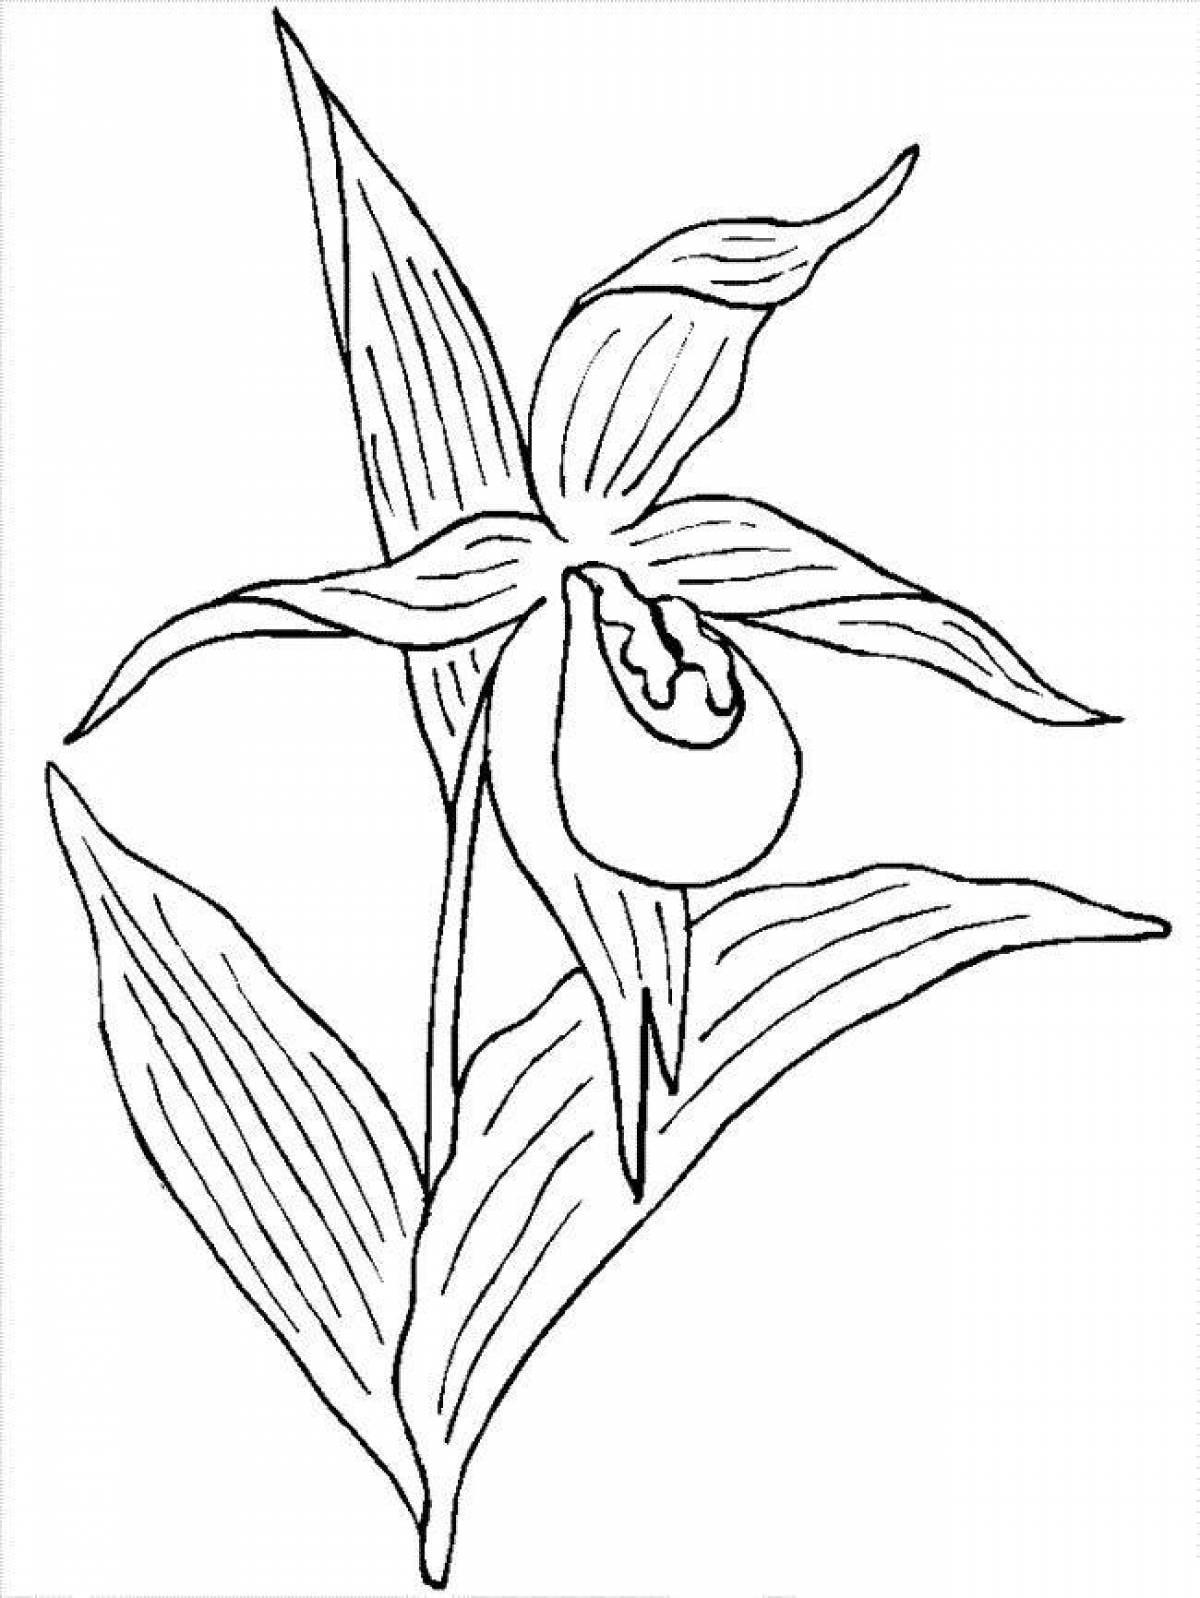 Coloring page lush plants of the red book of russia